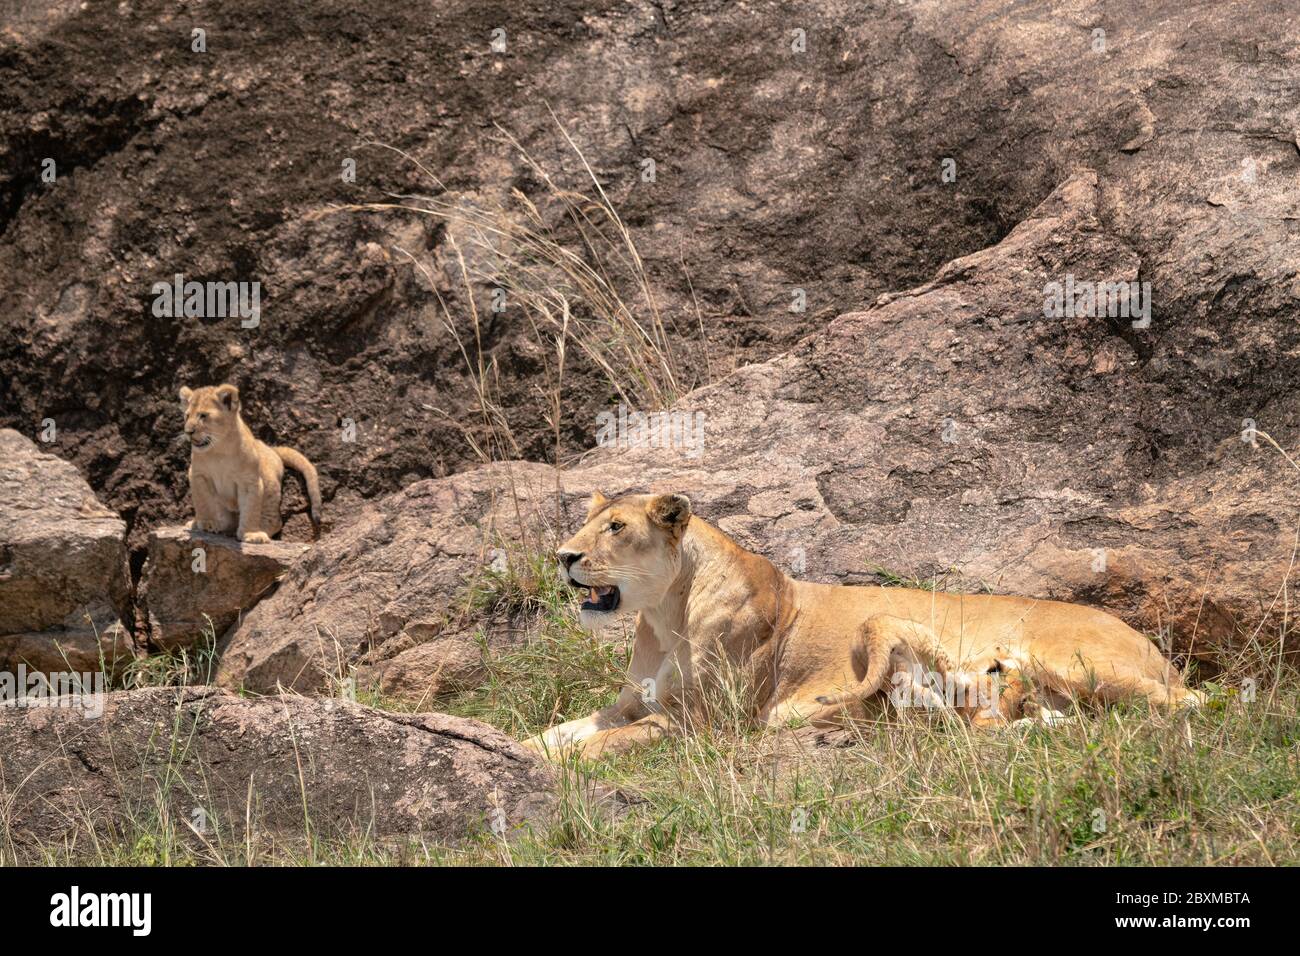 Mother lioness from the Black Rock Pride nurses her young cubs while another cub stands on a rock outside the entrance to its den. Stock Photo